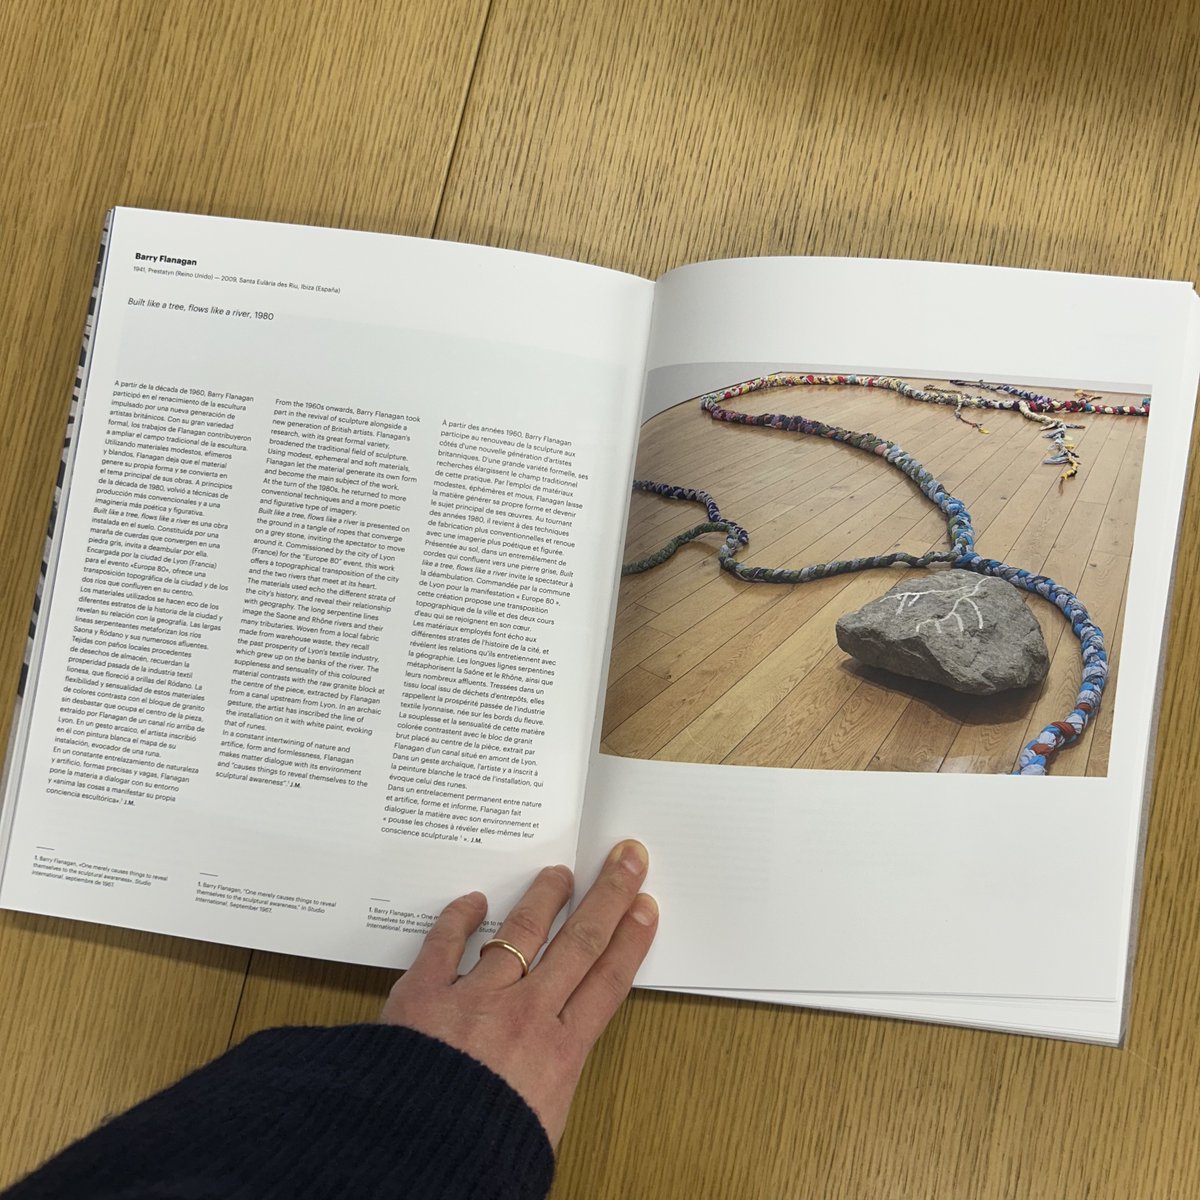 The publication for ‘Place-ness. Inhabiting space’ at Centre Pompidou, Malaga @centrepompidoumalaga which continues to run until 28th March and includes Barry's ‘Built like a tree, flows like a river’.